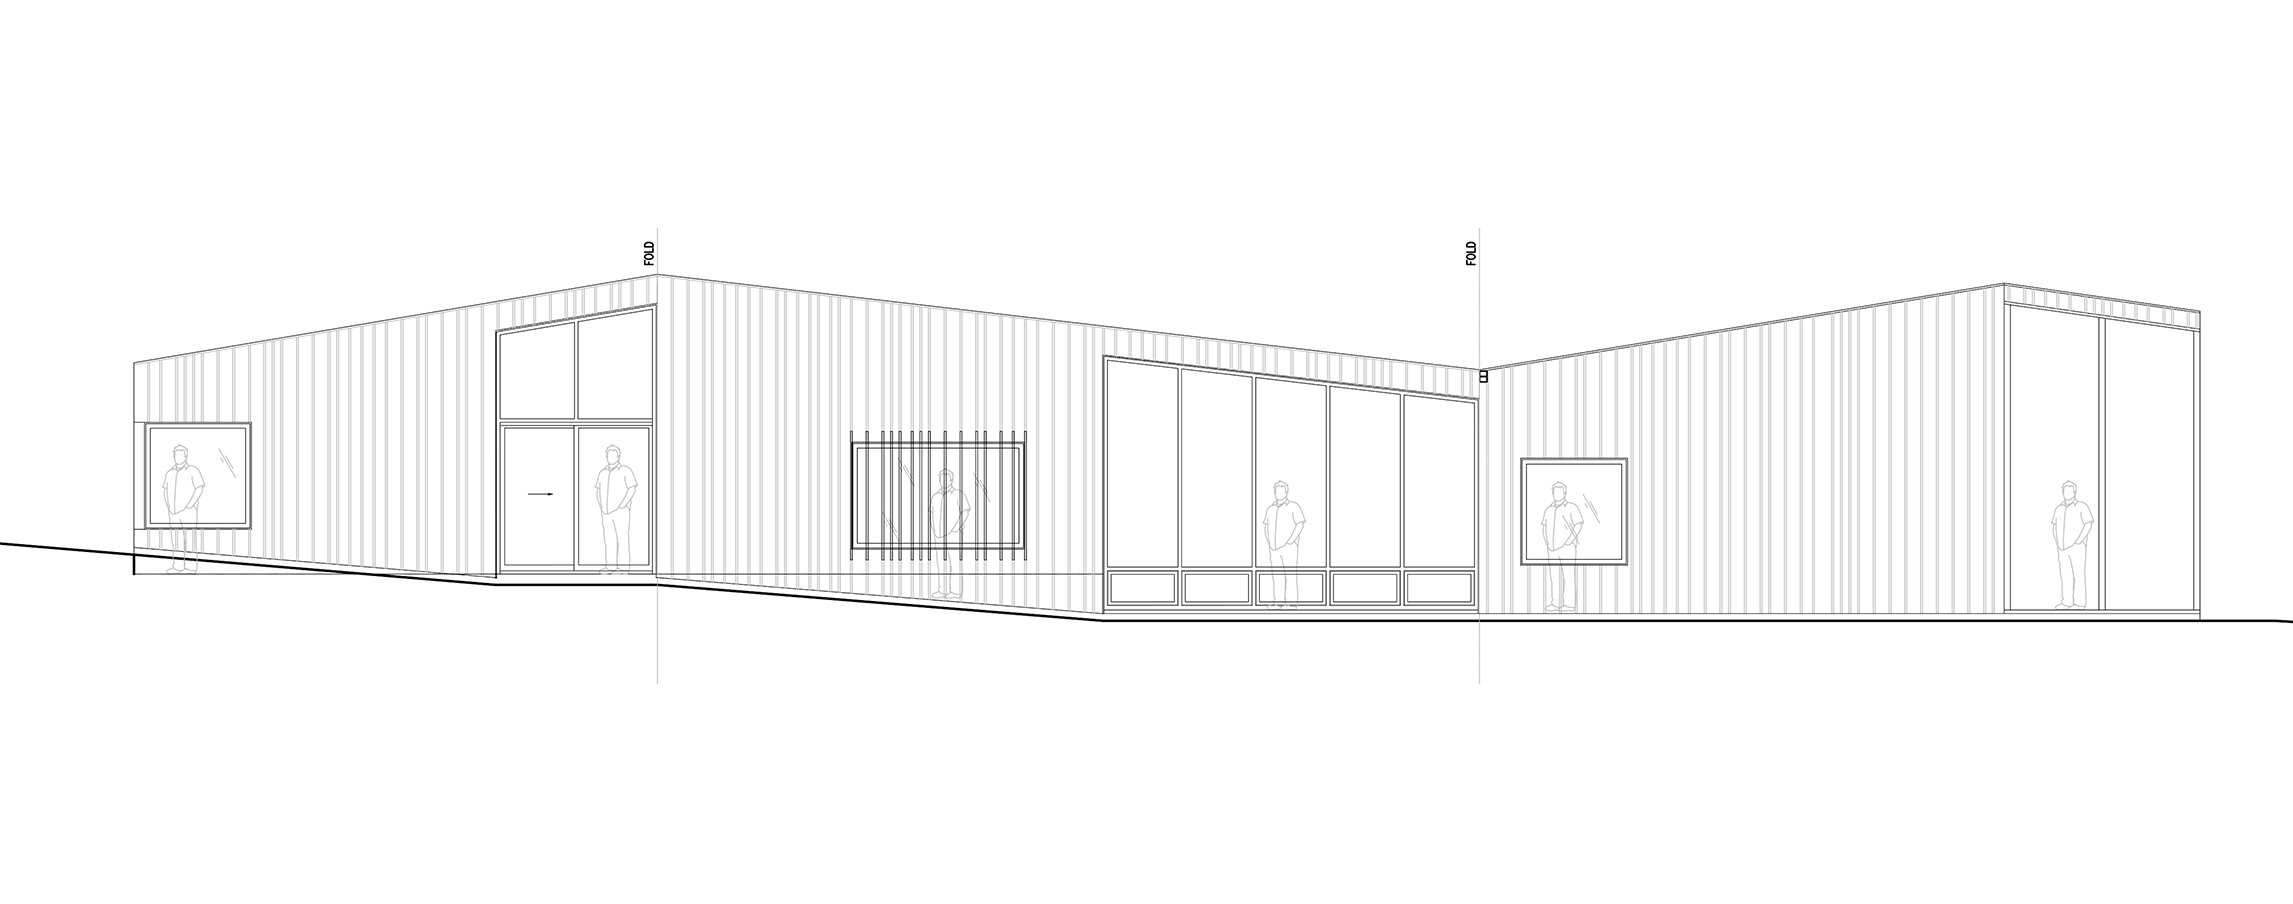 Z:\1. Active Projects\651 MOUNT HOPE HOUSE\1. Drawings\A. Data\E